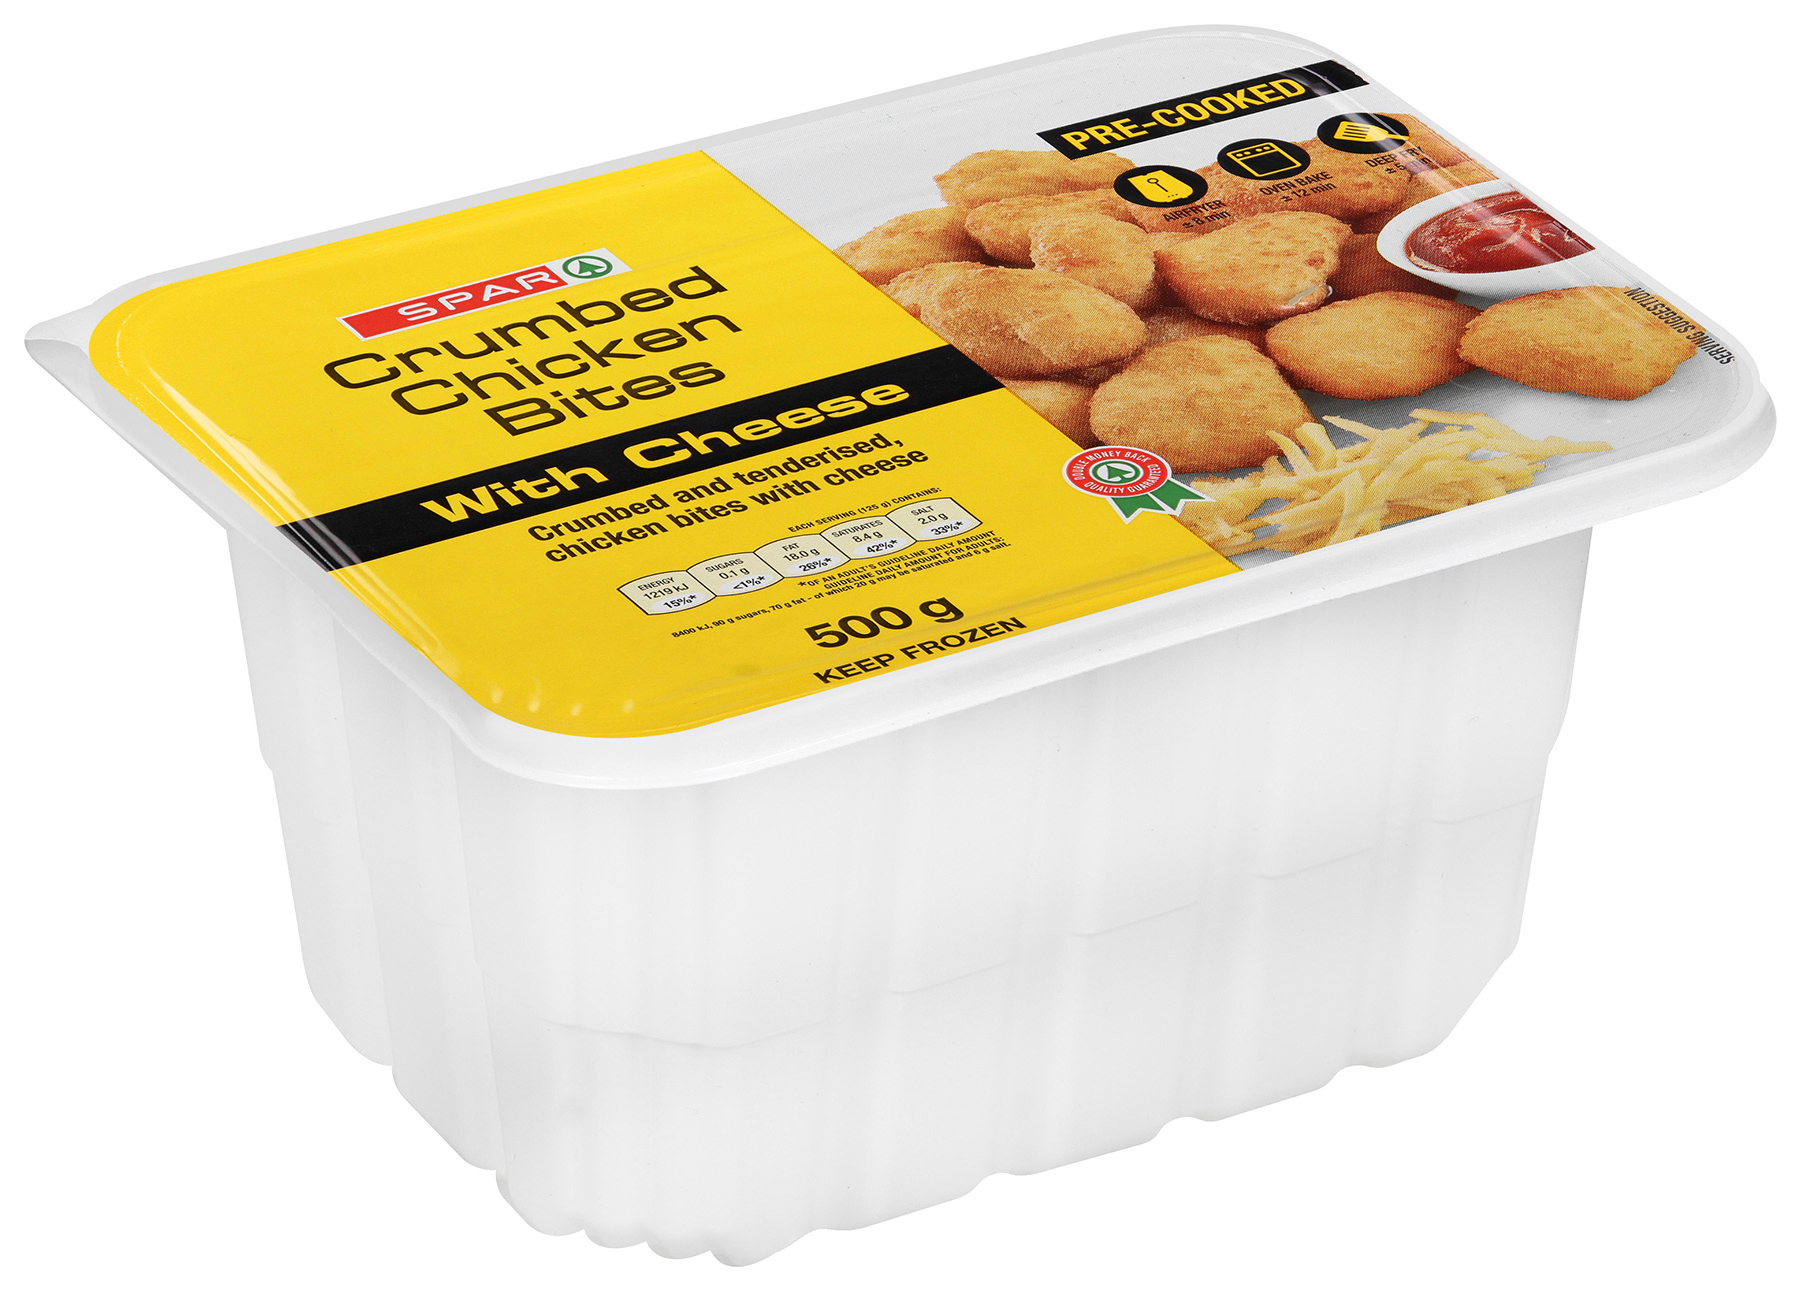 crumbed chicken bites with cheese